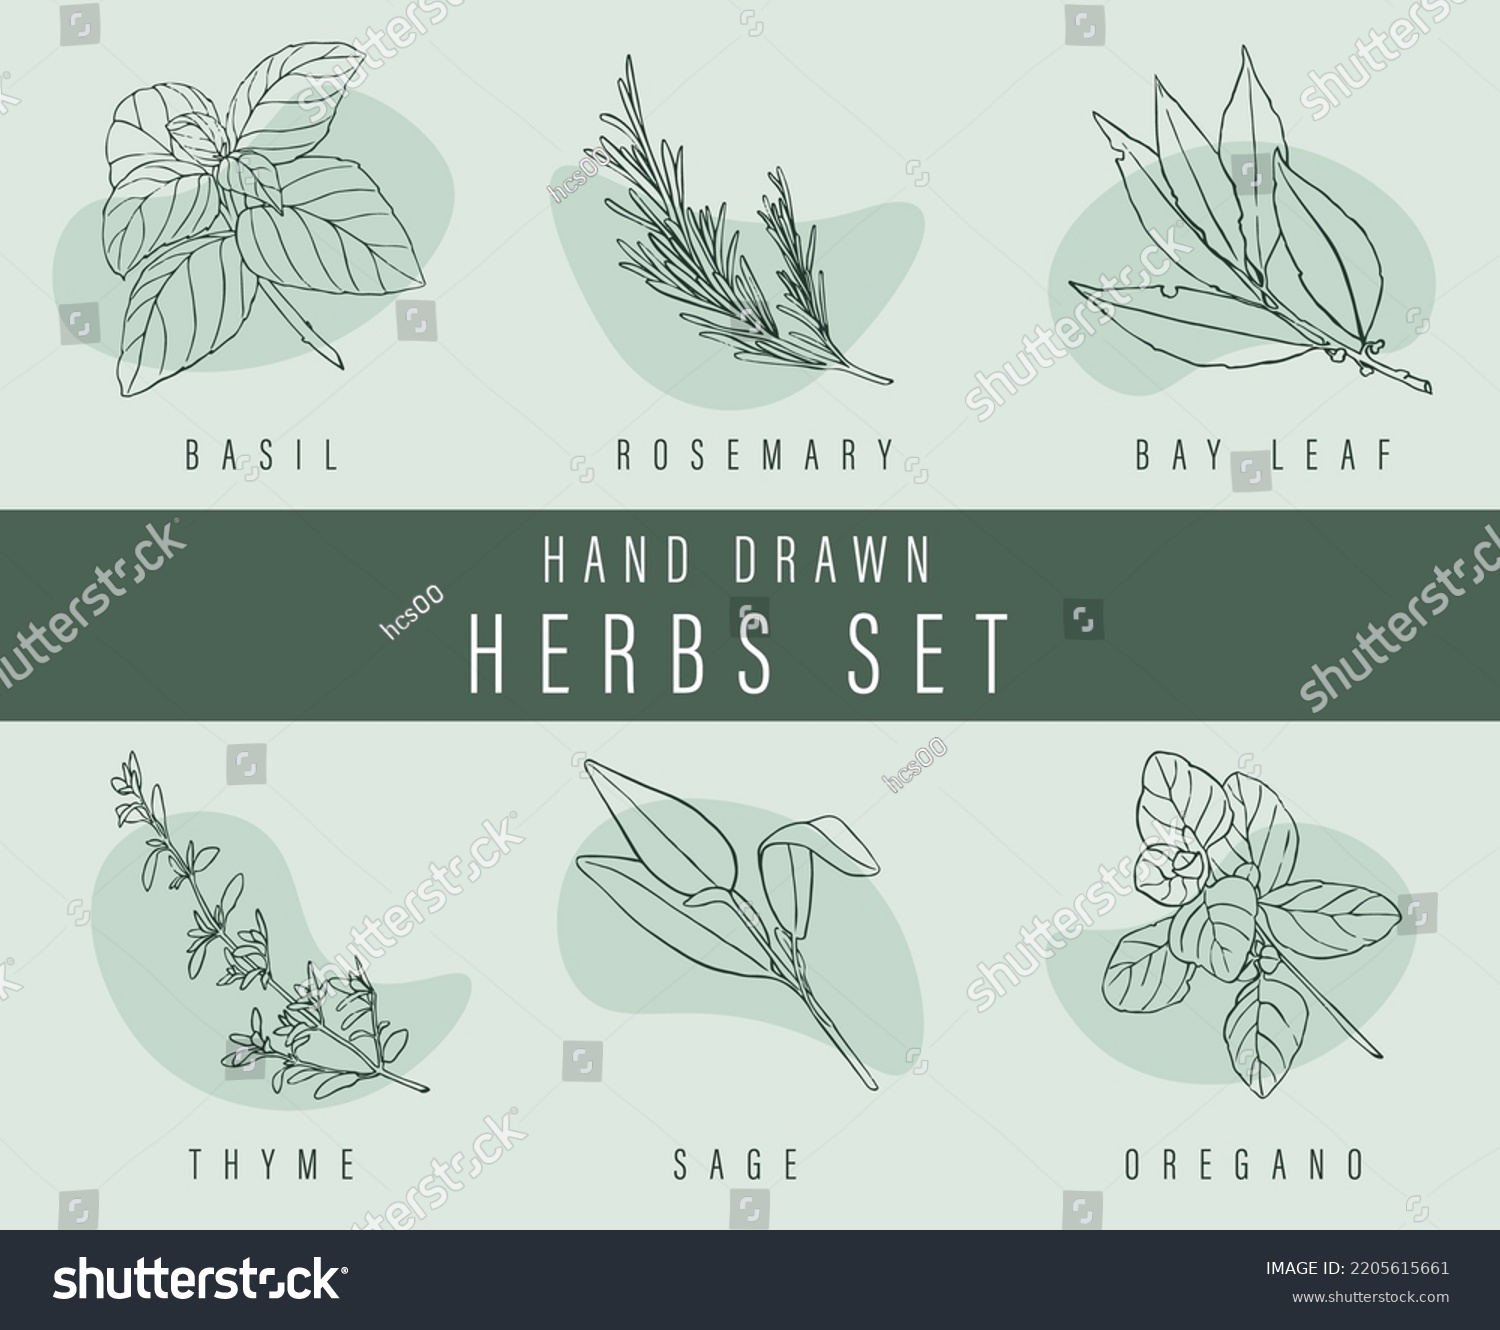 Hand drawn herbs set, vector illustration for labels - basil, rosemary, bay leaf, thyme, sage, oregano - common culinary spices seasoning #2205615661